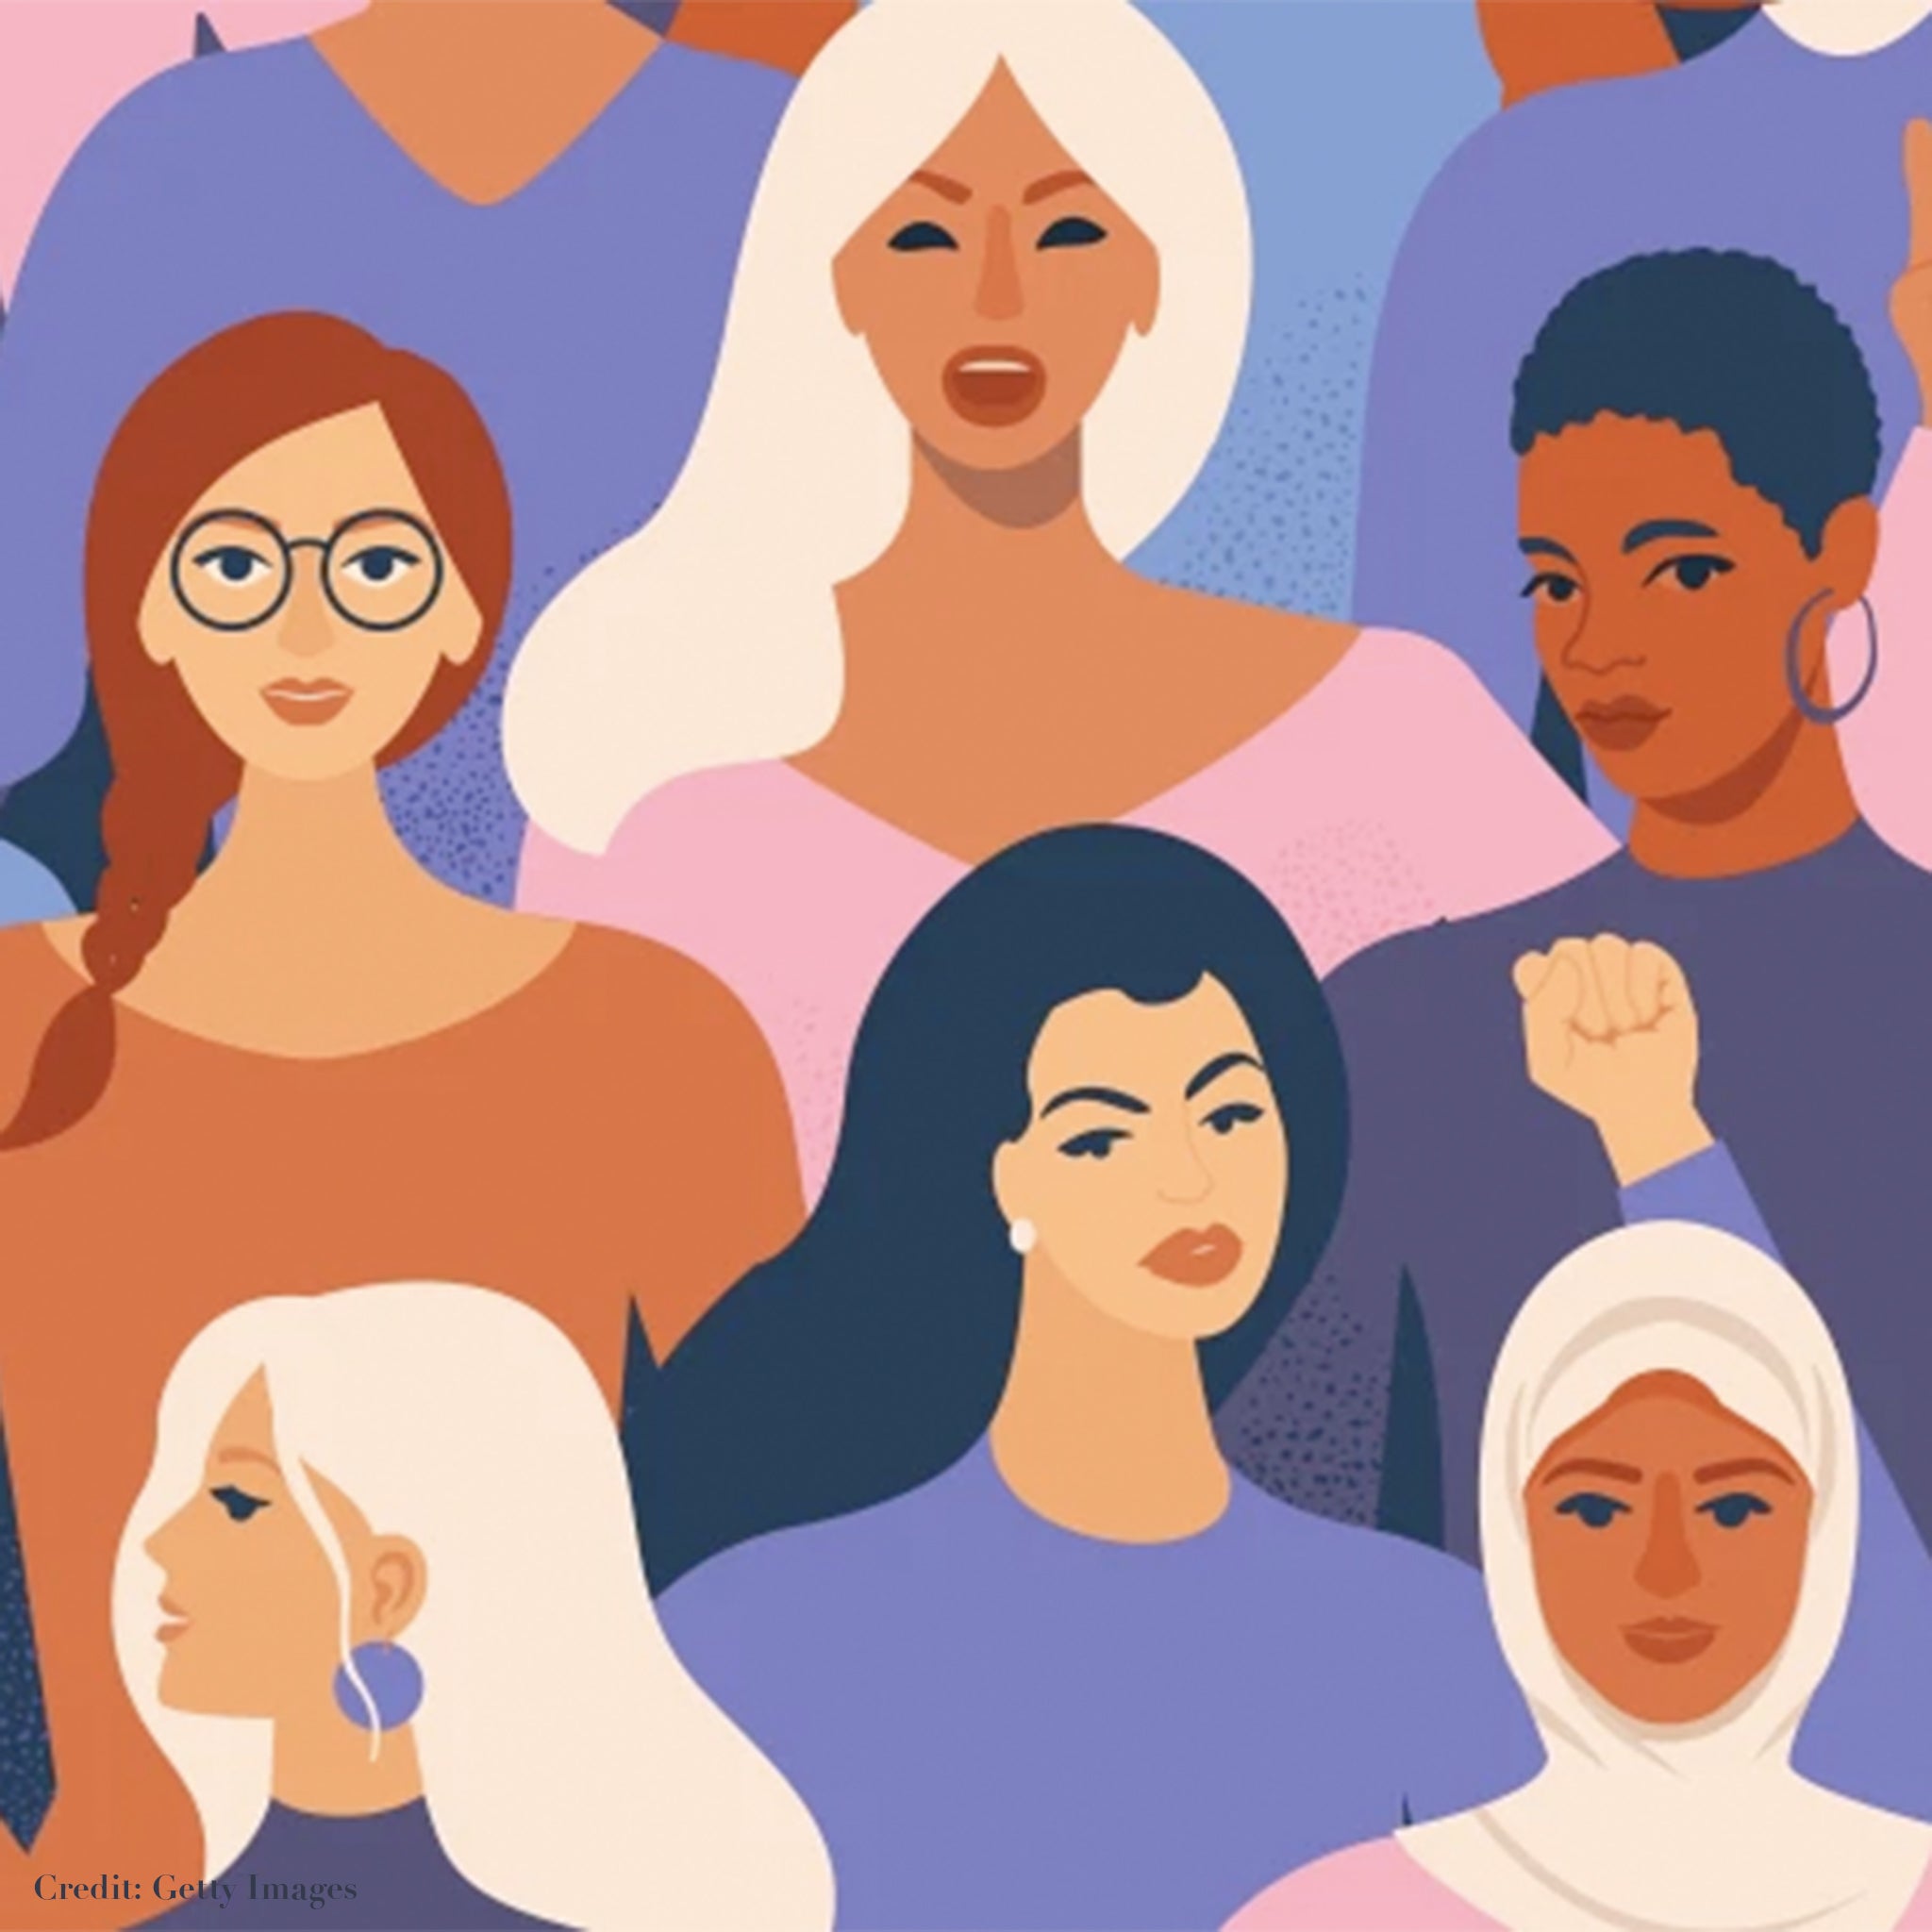 Empowering Quotes by Strong Women on International Women’s Day